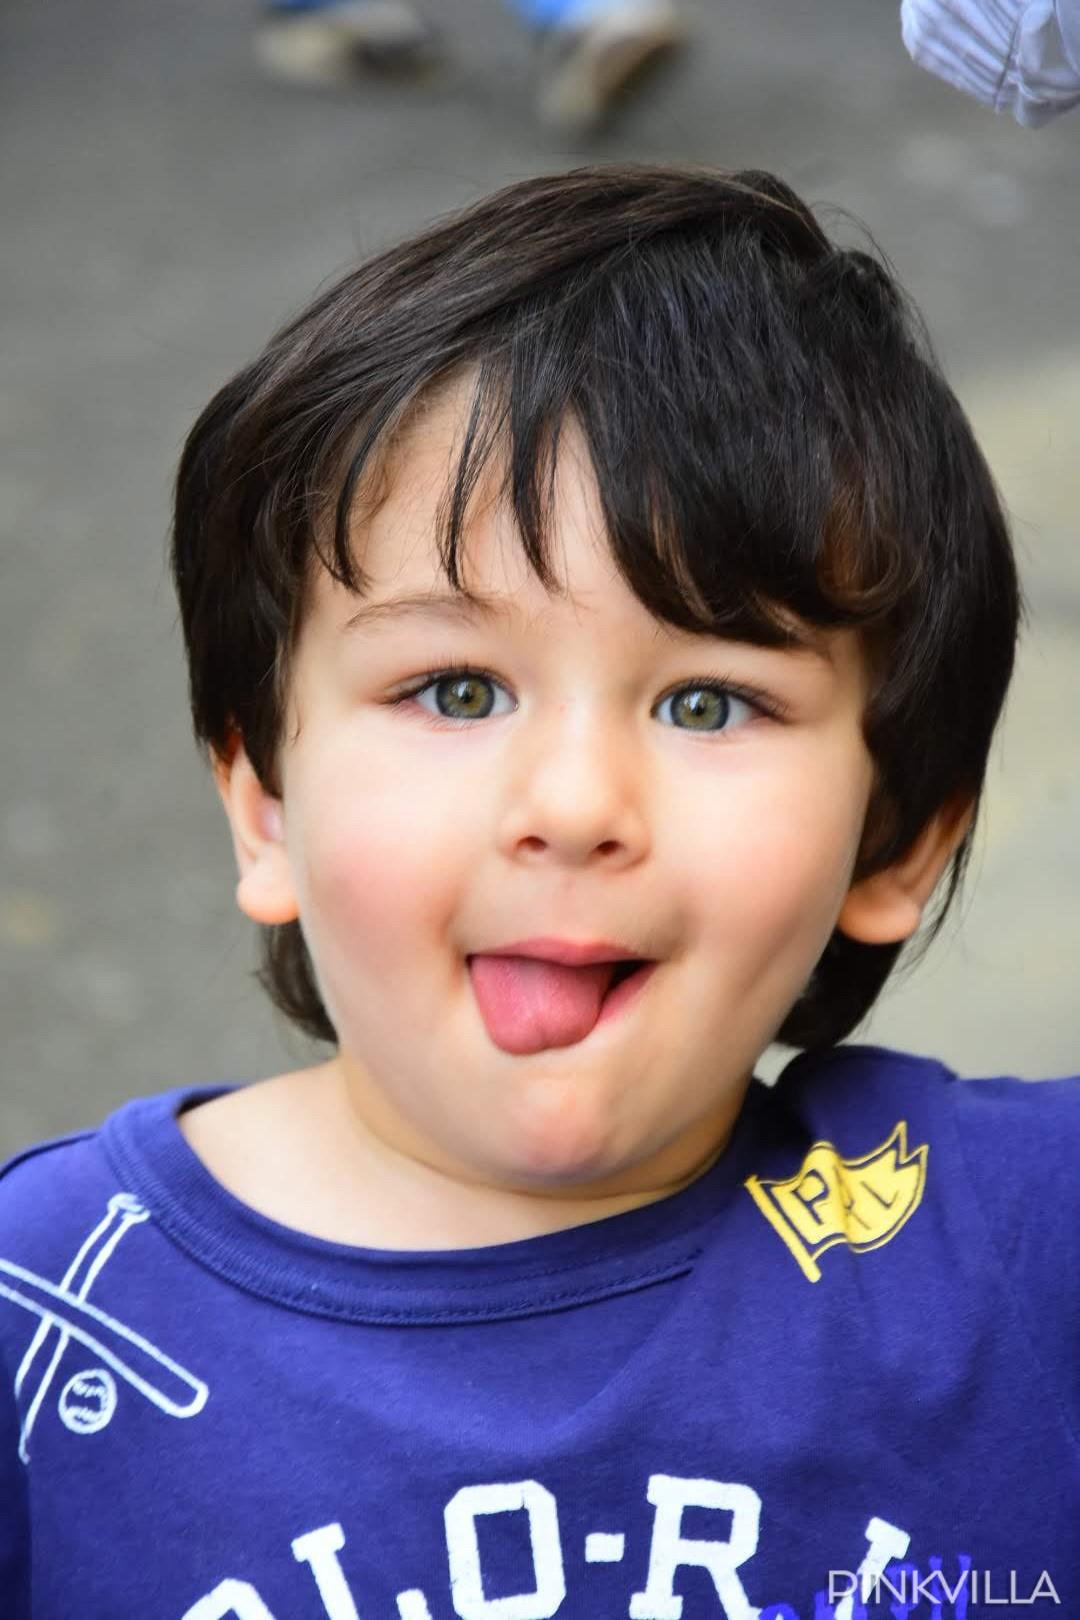 Taimur And Jeh Ali Khan Will Melt Hearts With Their Cuteness In New  Pictures, Check Out The Adorable Photos Of The Star Kids - News18